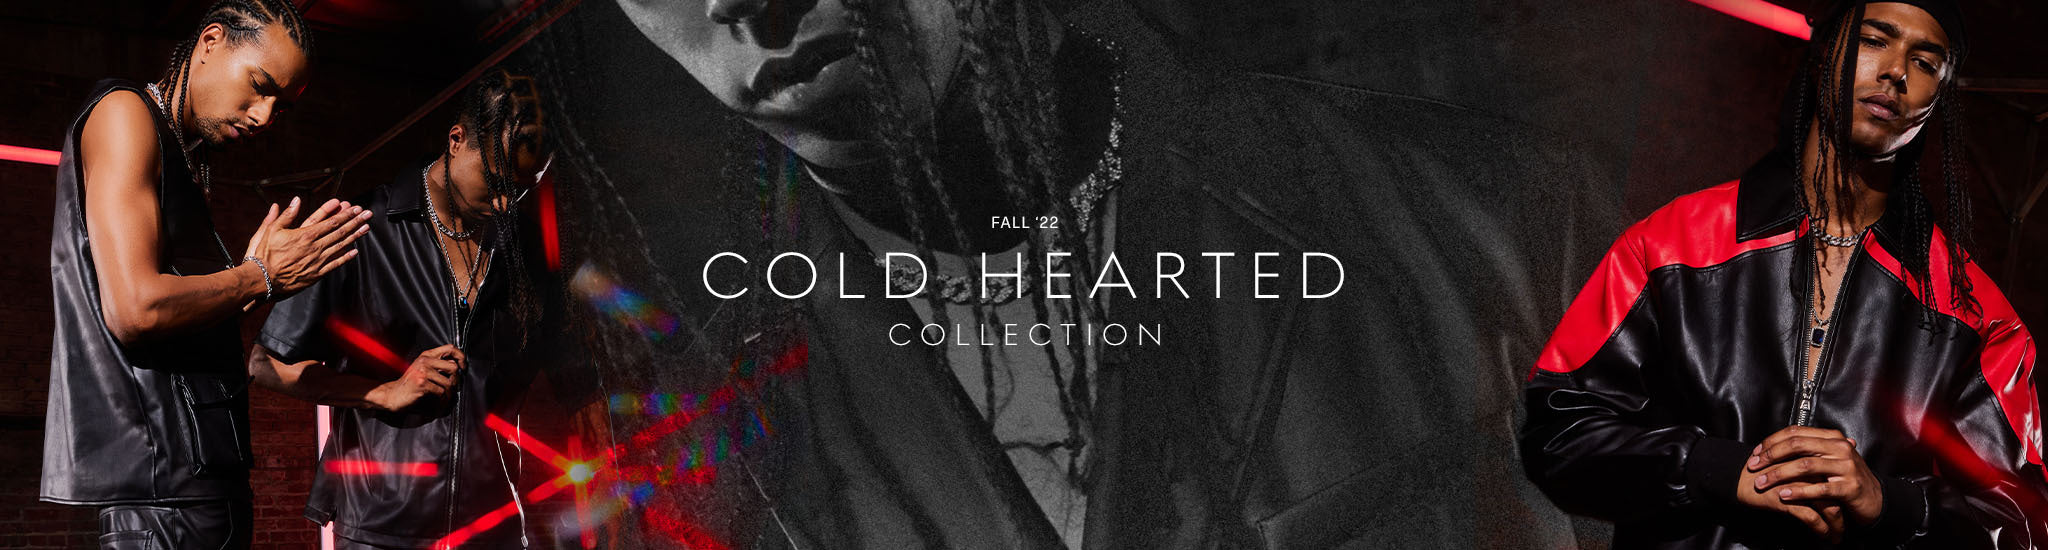 Cold Hearted - Fall '22 Collection